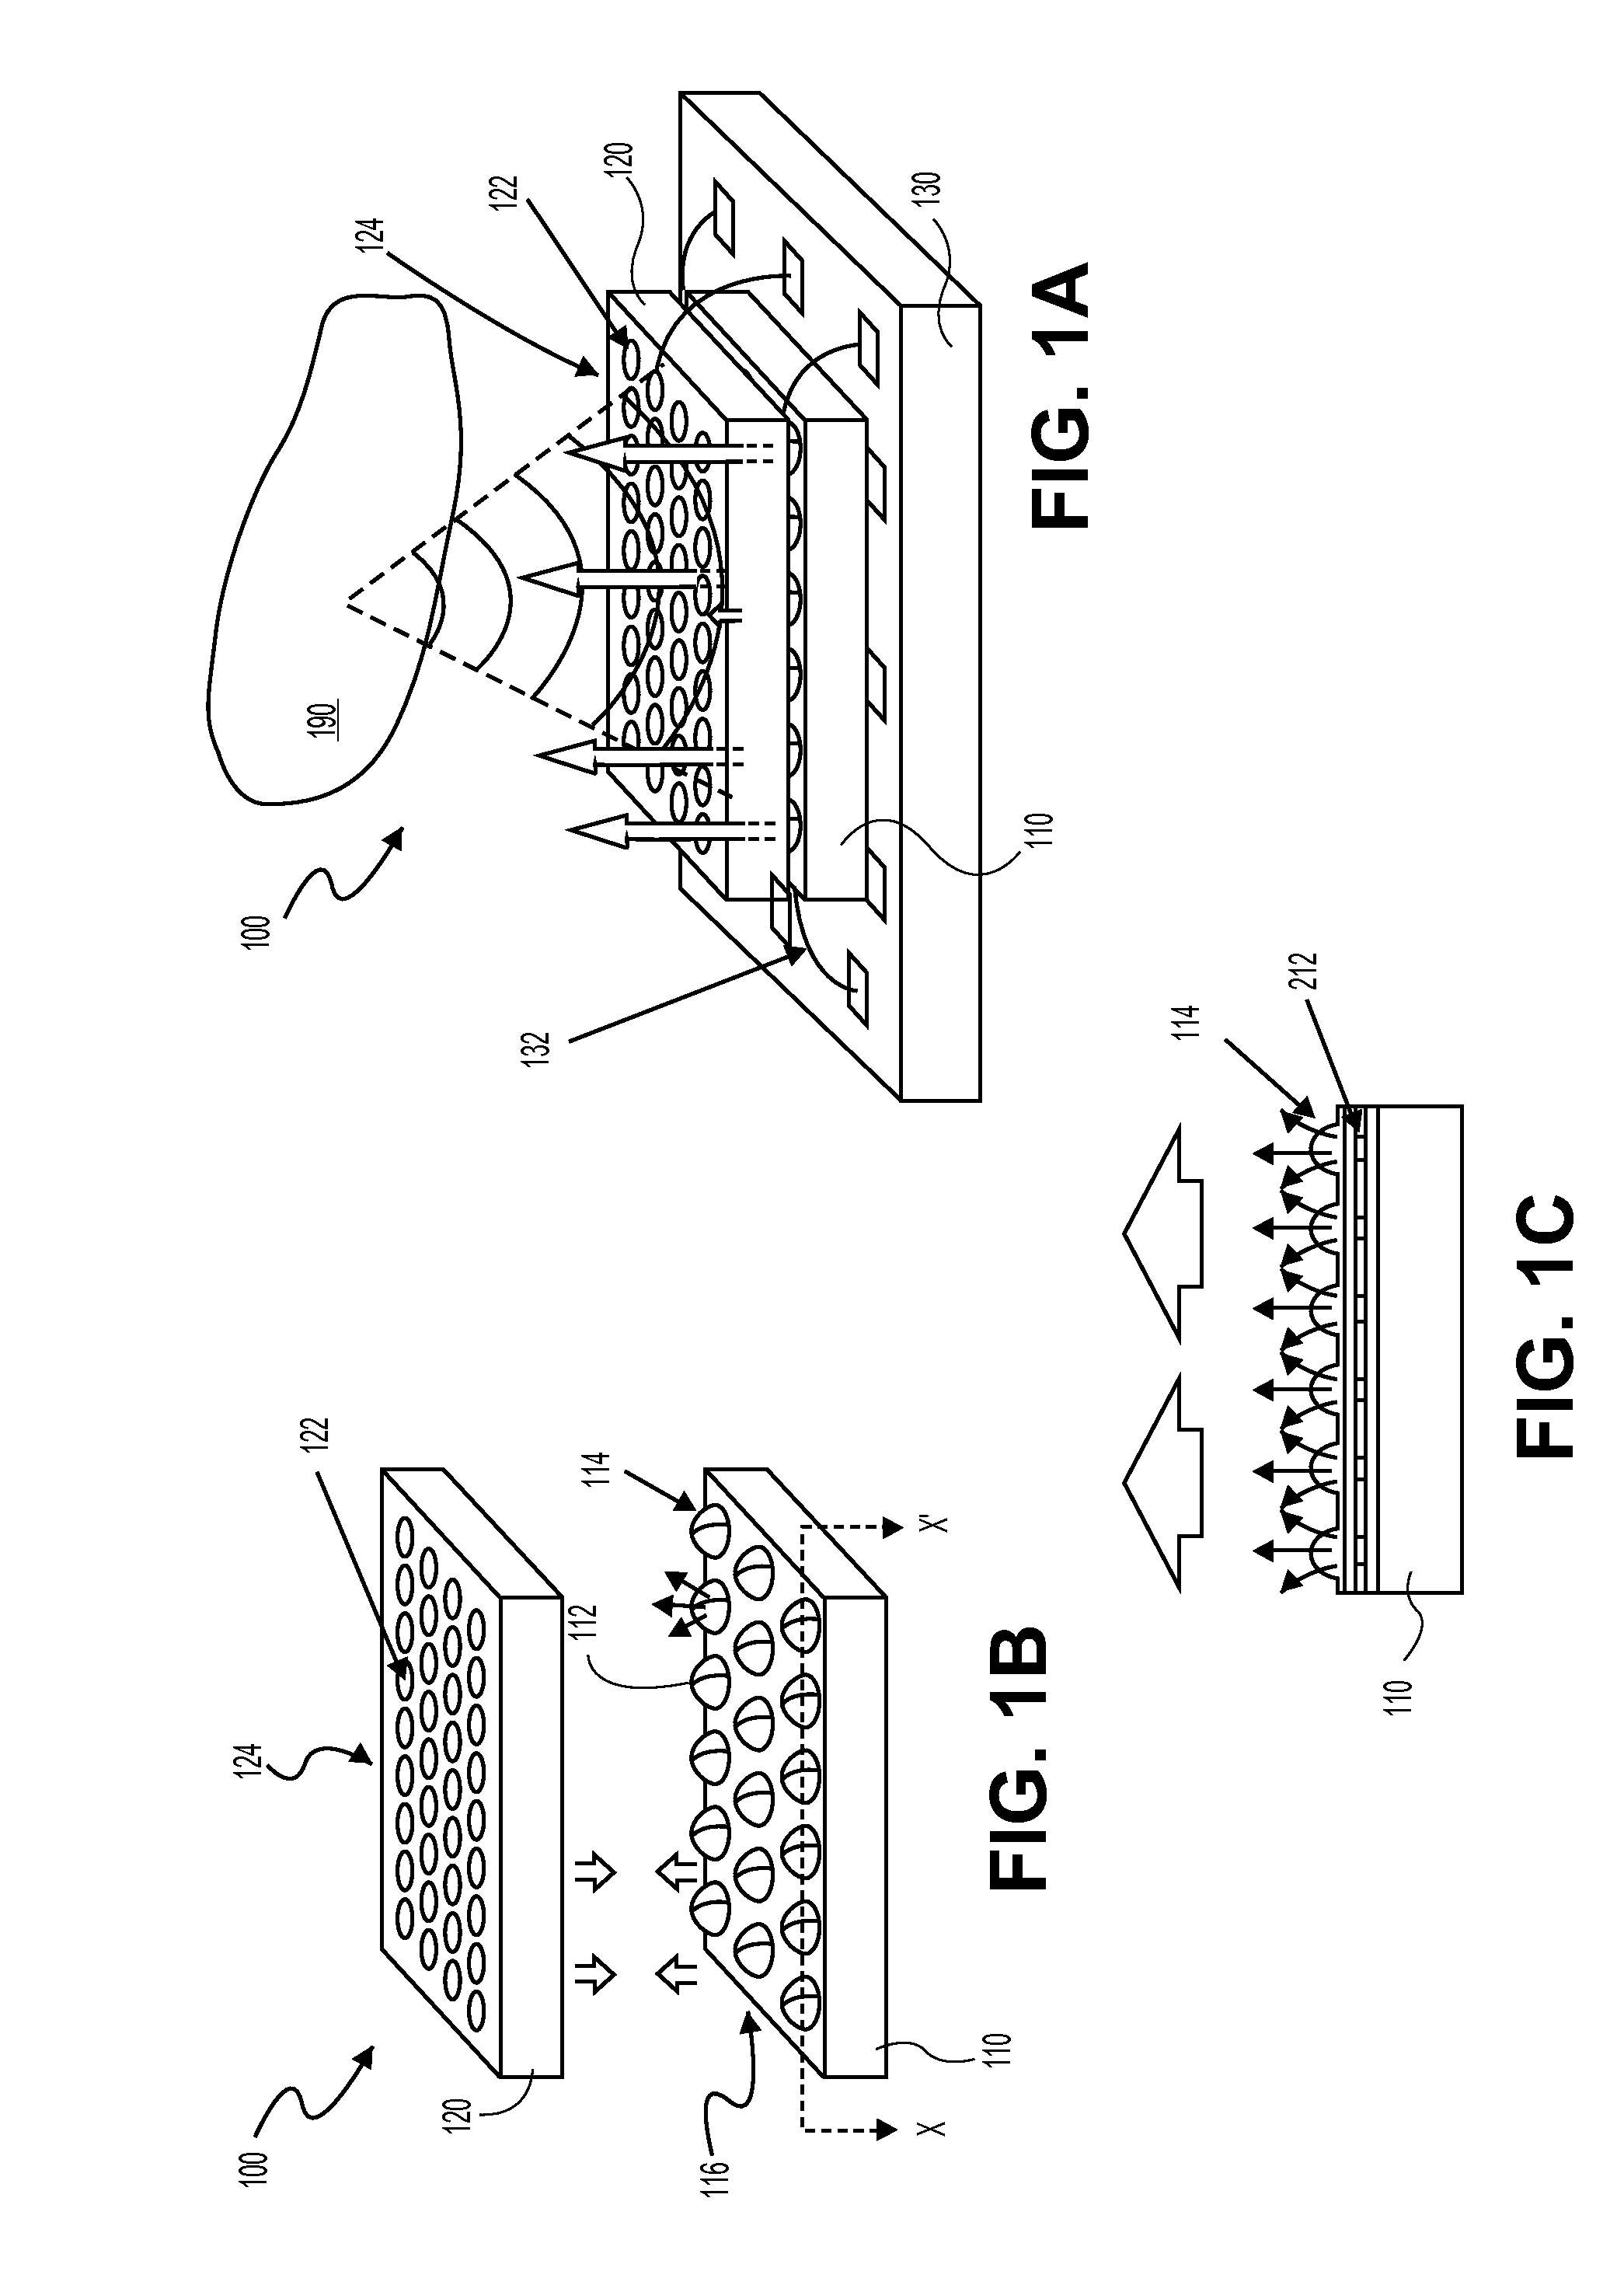 Photoacoustic imaging devices and methods of making and using the same